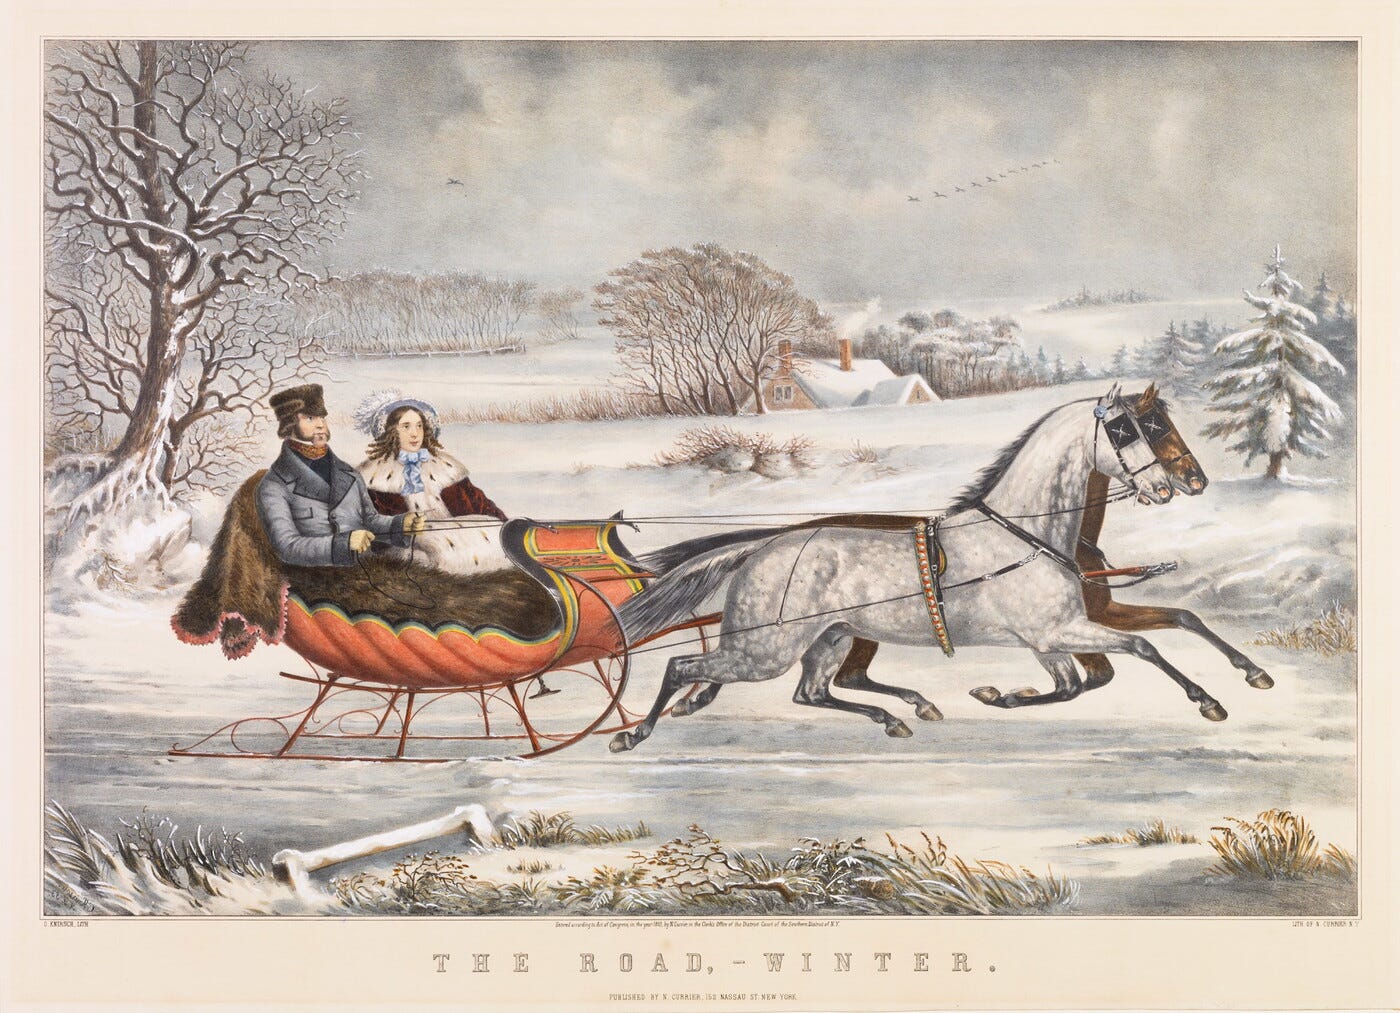 A color print of a couple in a horse drawn-sleigh riding through a snowy countryside with the words, "The Road - Winter" under the illustration.